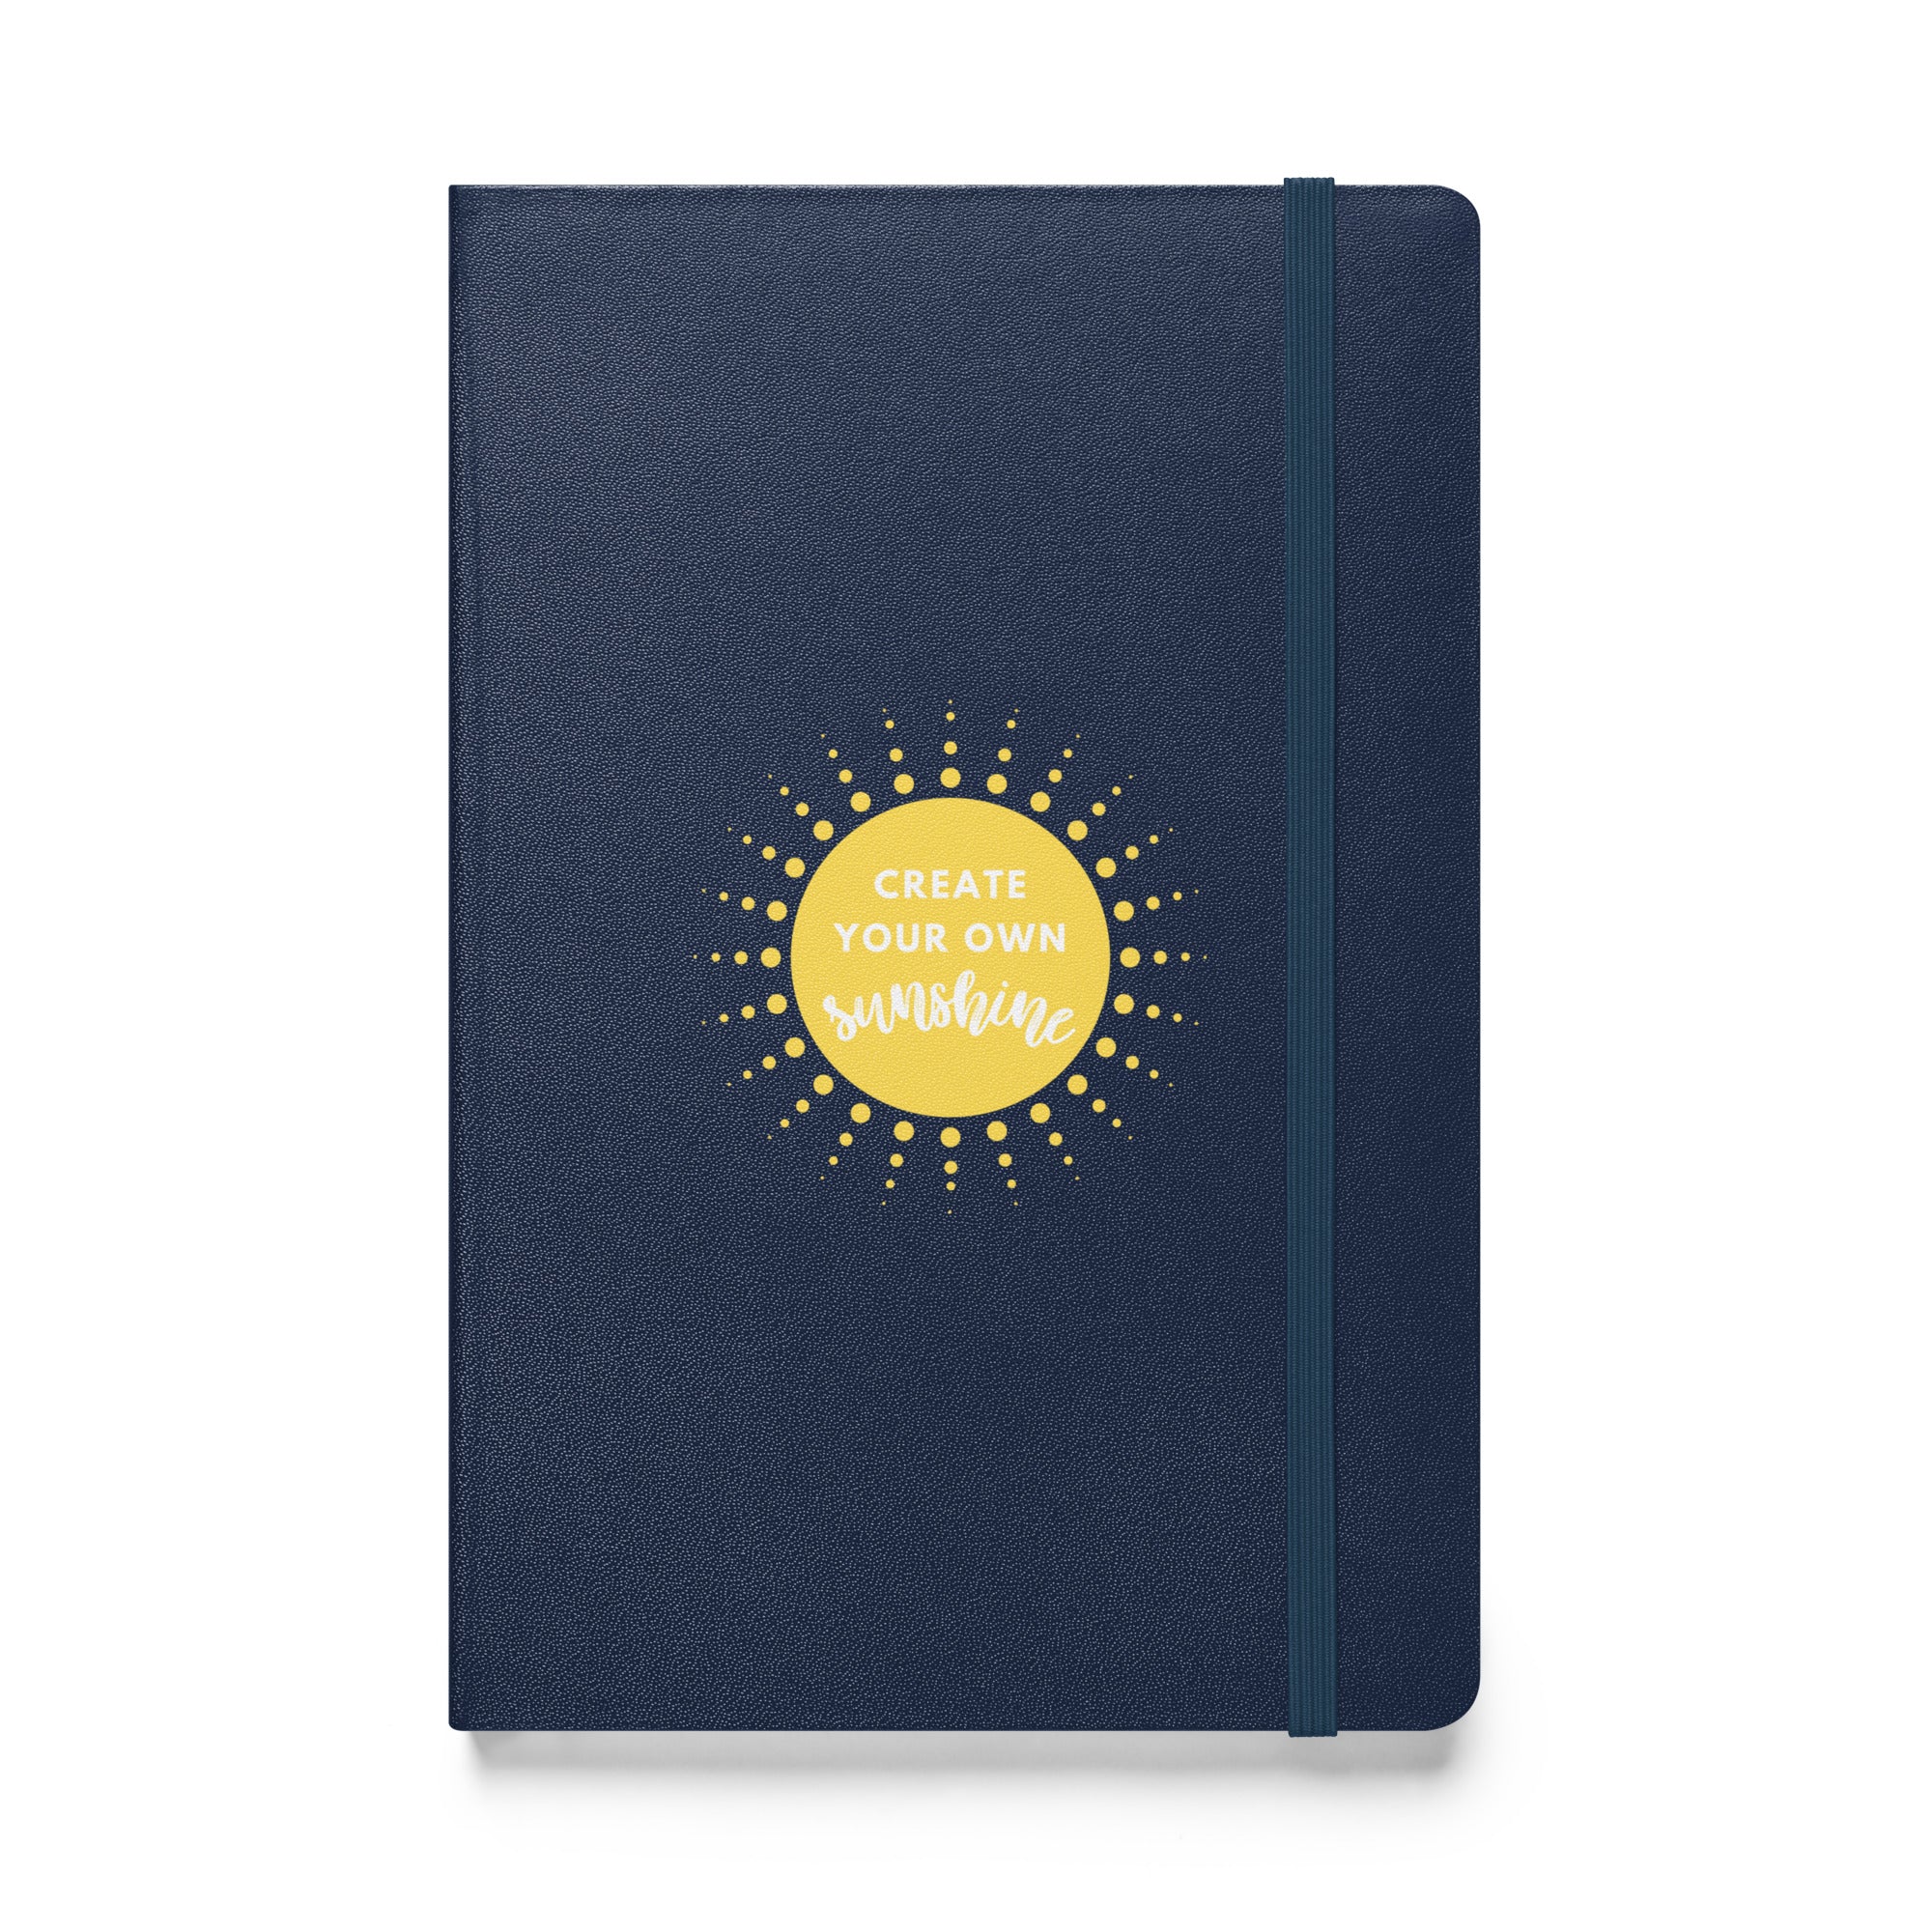 Create Your Own Sunshine Hardcover bound notebook